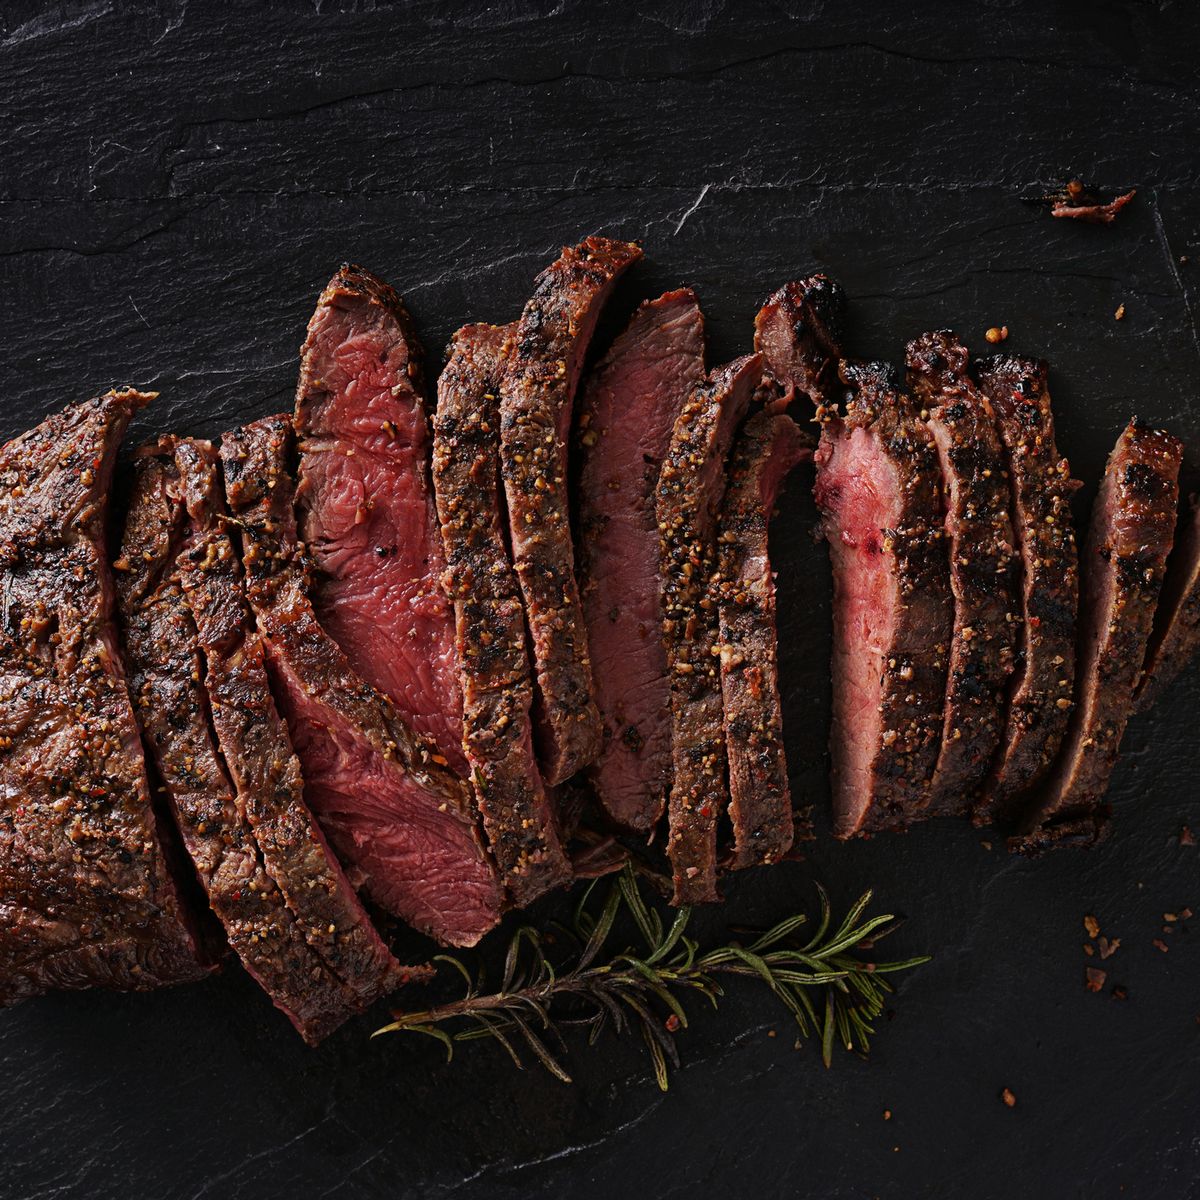 https://hips.hearstapps.com/hmg-prod/images/grilled-flat-iron-steak-shot-in-flat-lay-style-royalty-free-image-594463000-1550691204.jpg?crop=0.655xw:1.00xh;0.173xw,0&resize=1200:*